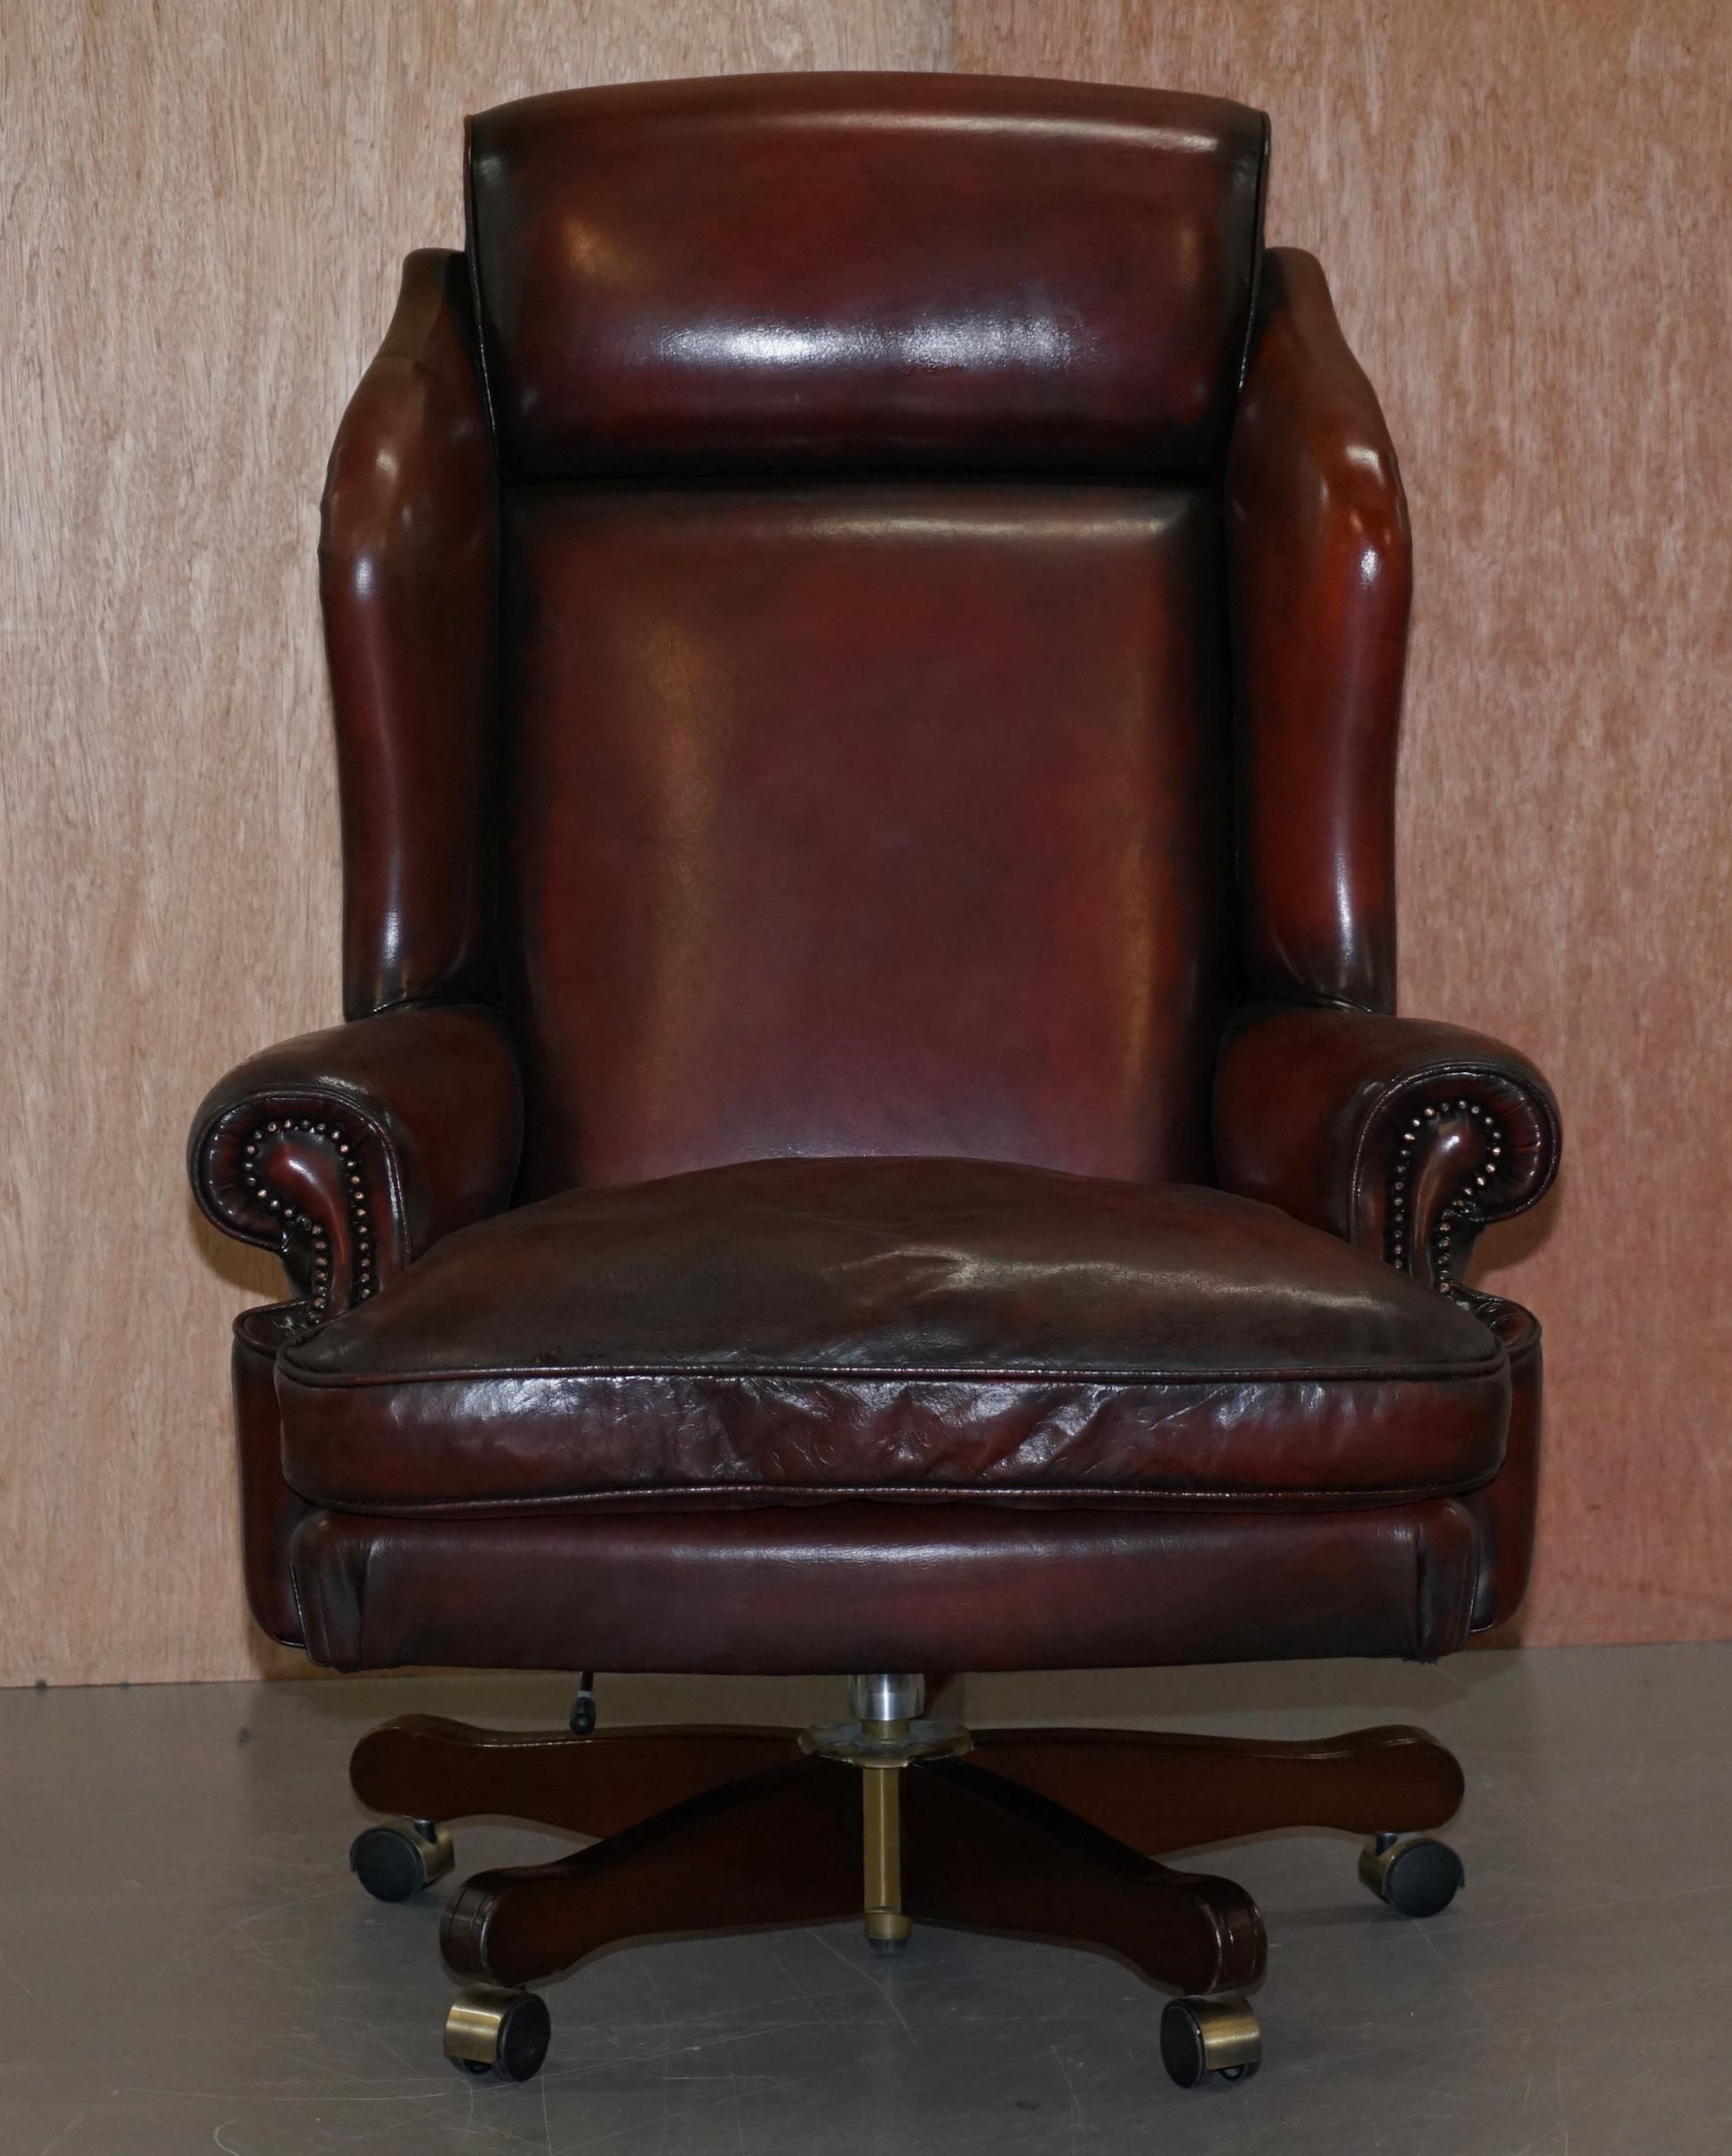 We are delighted to offer for sale this stunning fully restored Harrods London hand dyed deep Oxblood leather exceptionally comfortable Wingback Presidents directors chair

This is pretty much the most comfortable captains chair I have ever sat